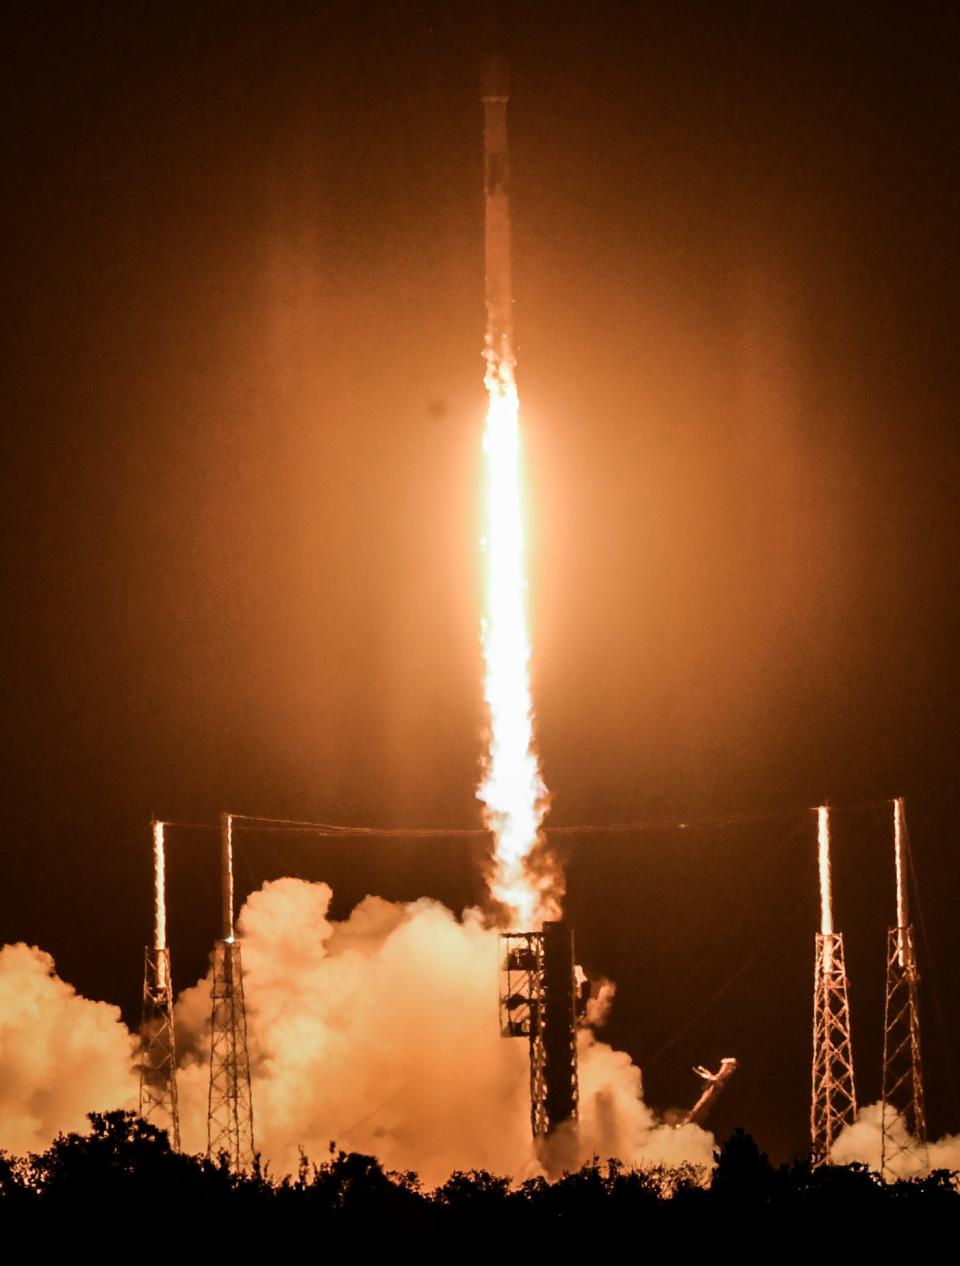 A SpaceX Falcon 9 rocket lifts off Thursday night from Cape Canaveral Space Force Station.